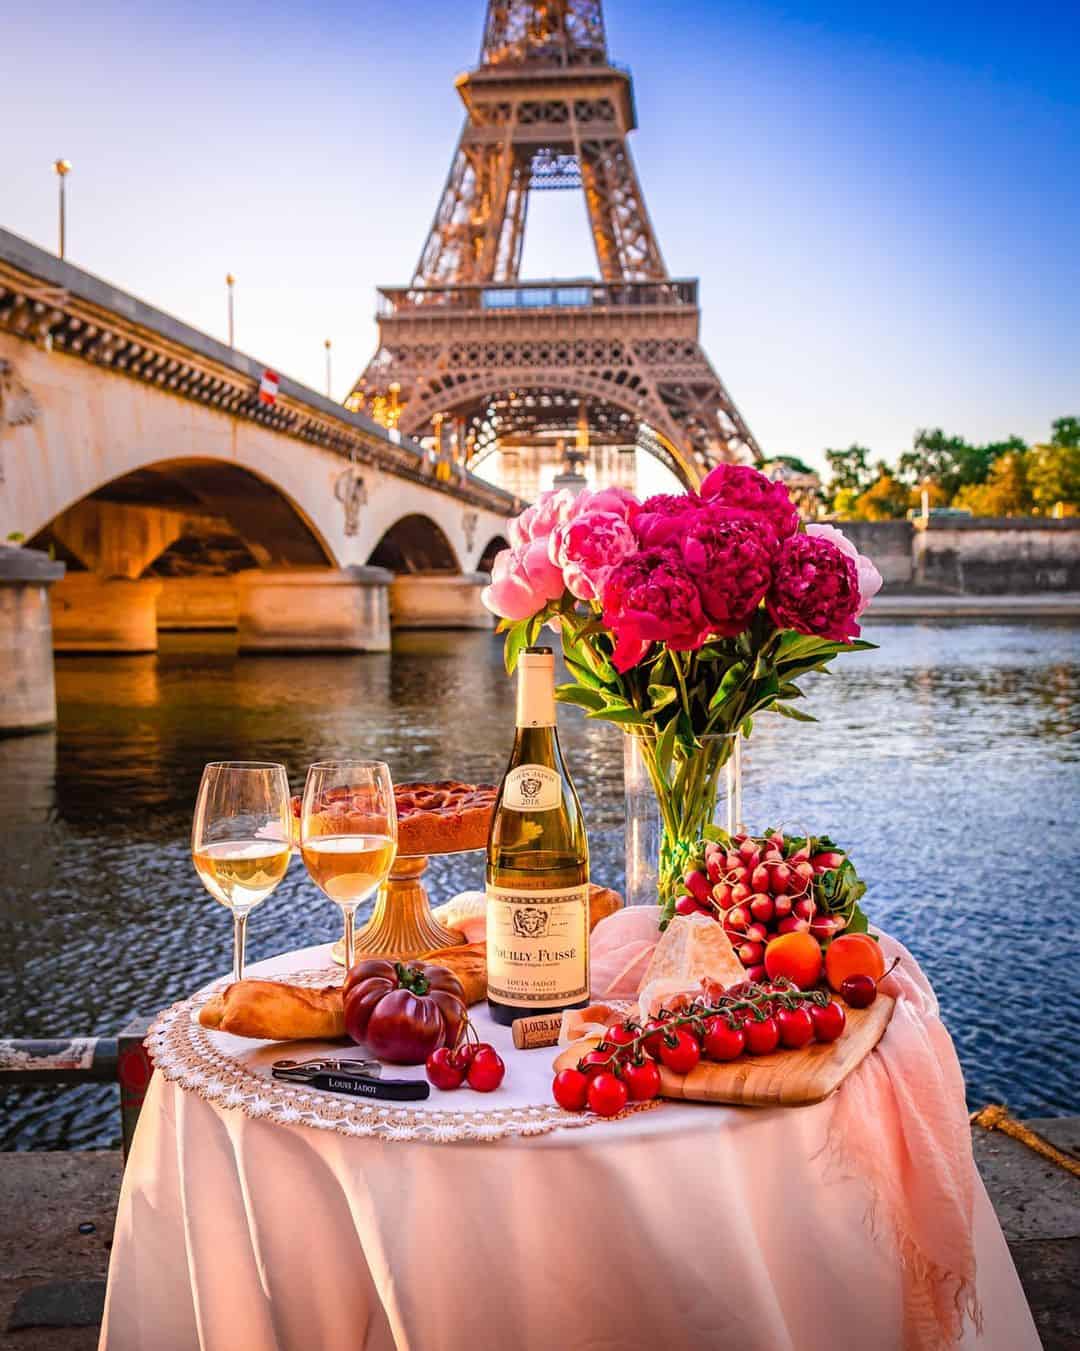 Picnic in front of the Eiffel Tower